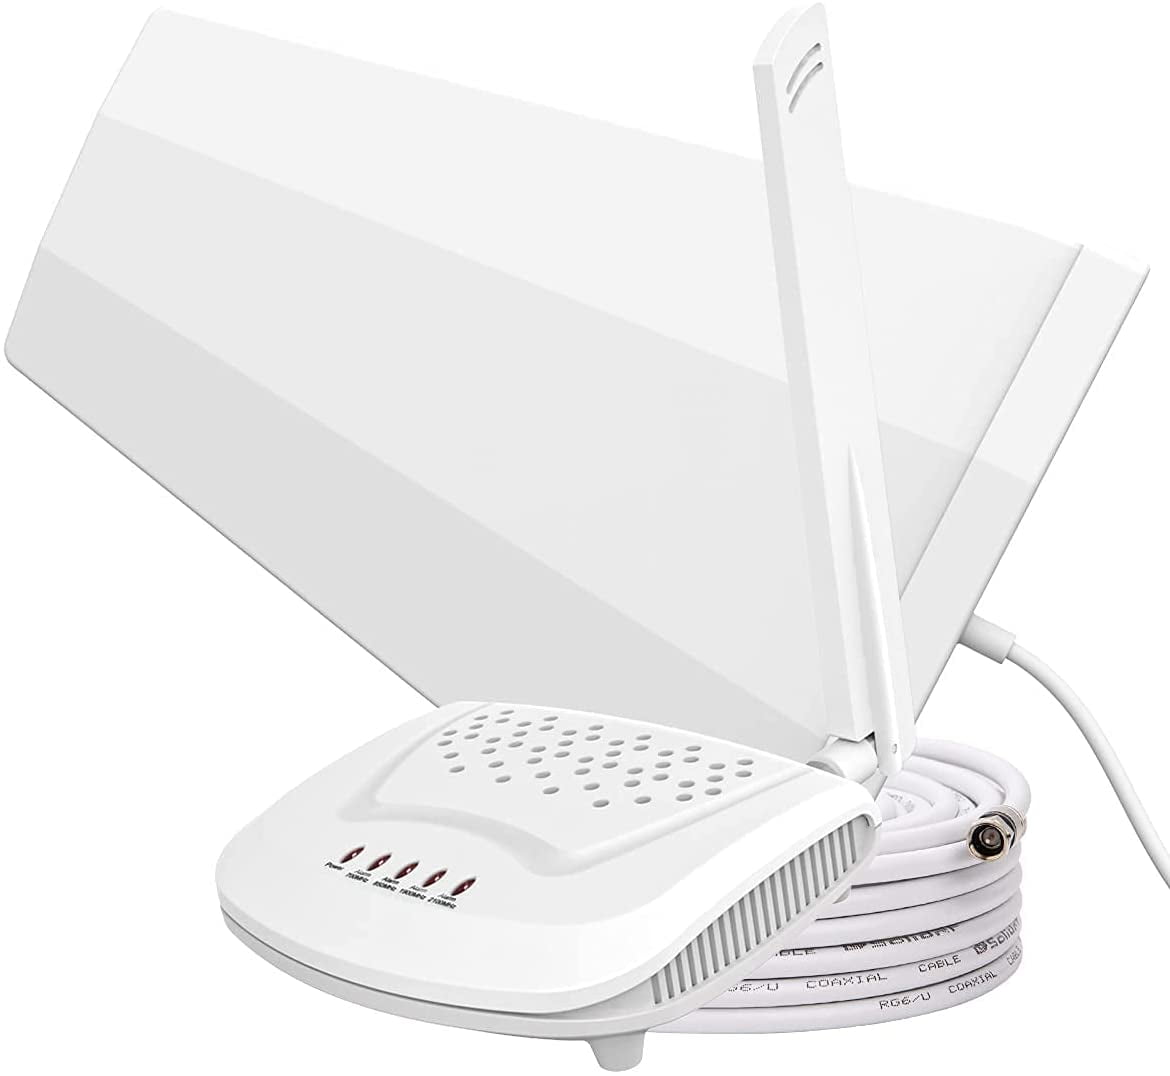 Amazboost-High Gain Antenna-Cell-Phone-Booster for-Home Cell Phone Signal Booster Supports Up to 2500 Square Foot Area